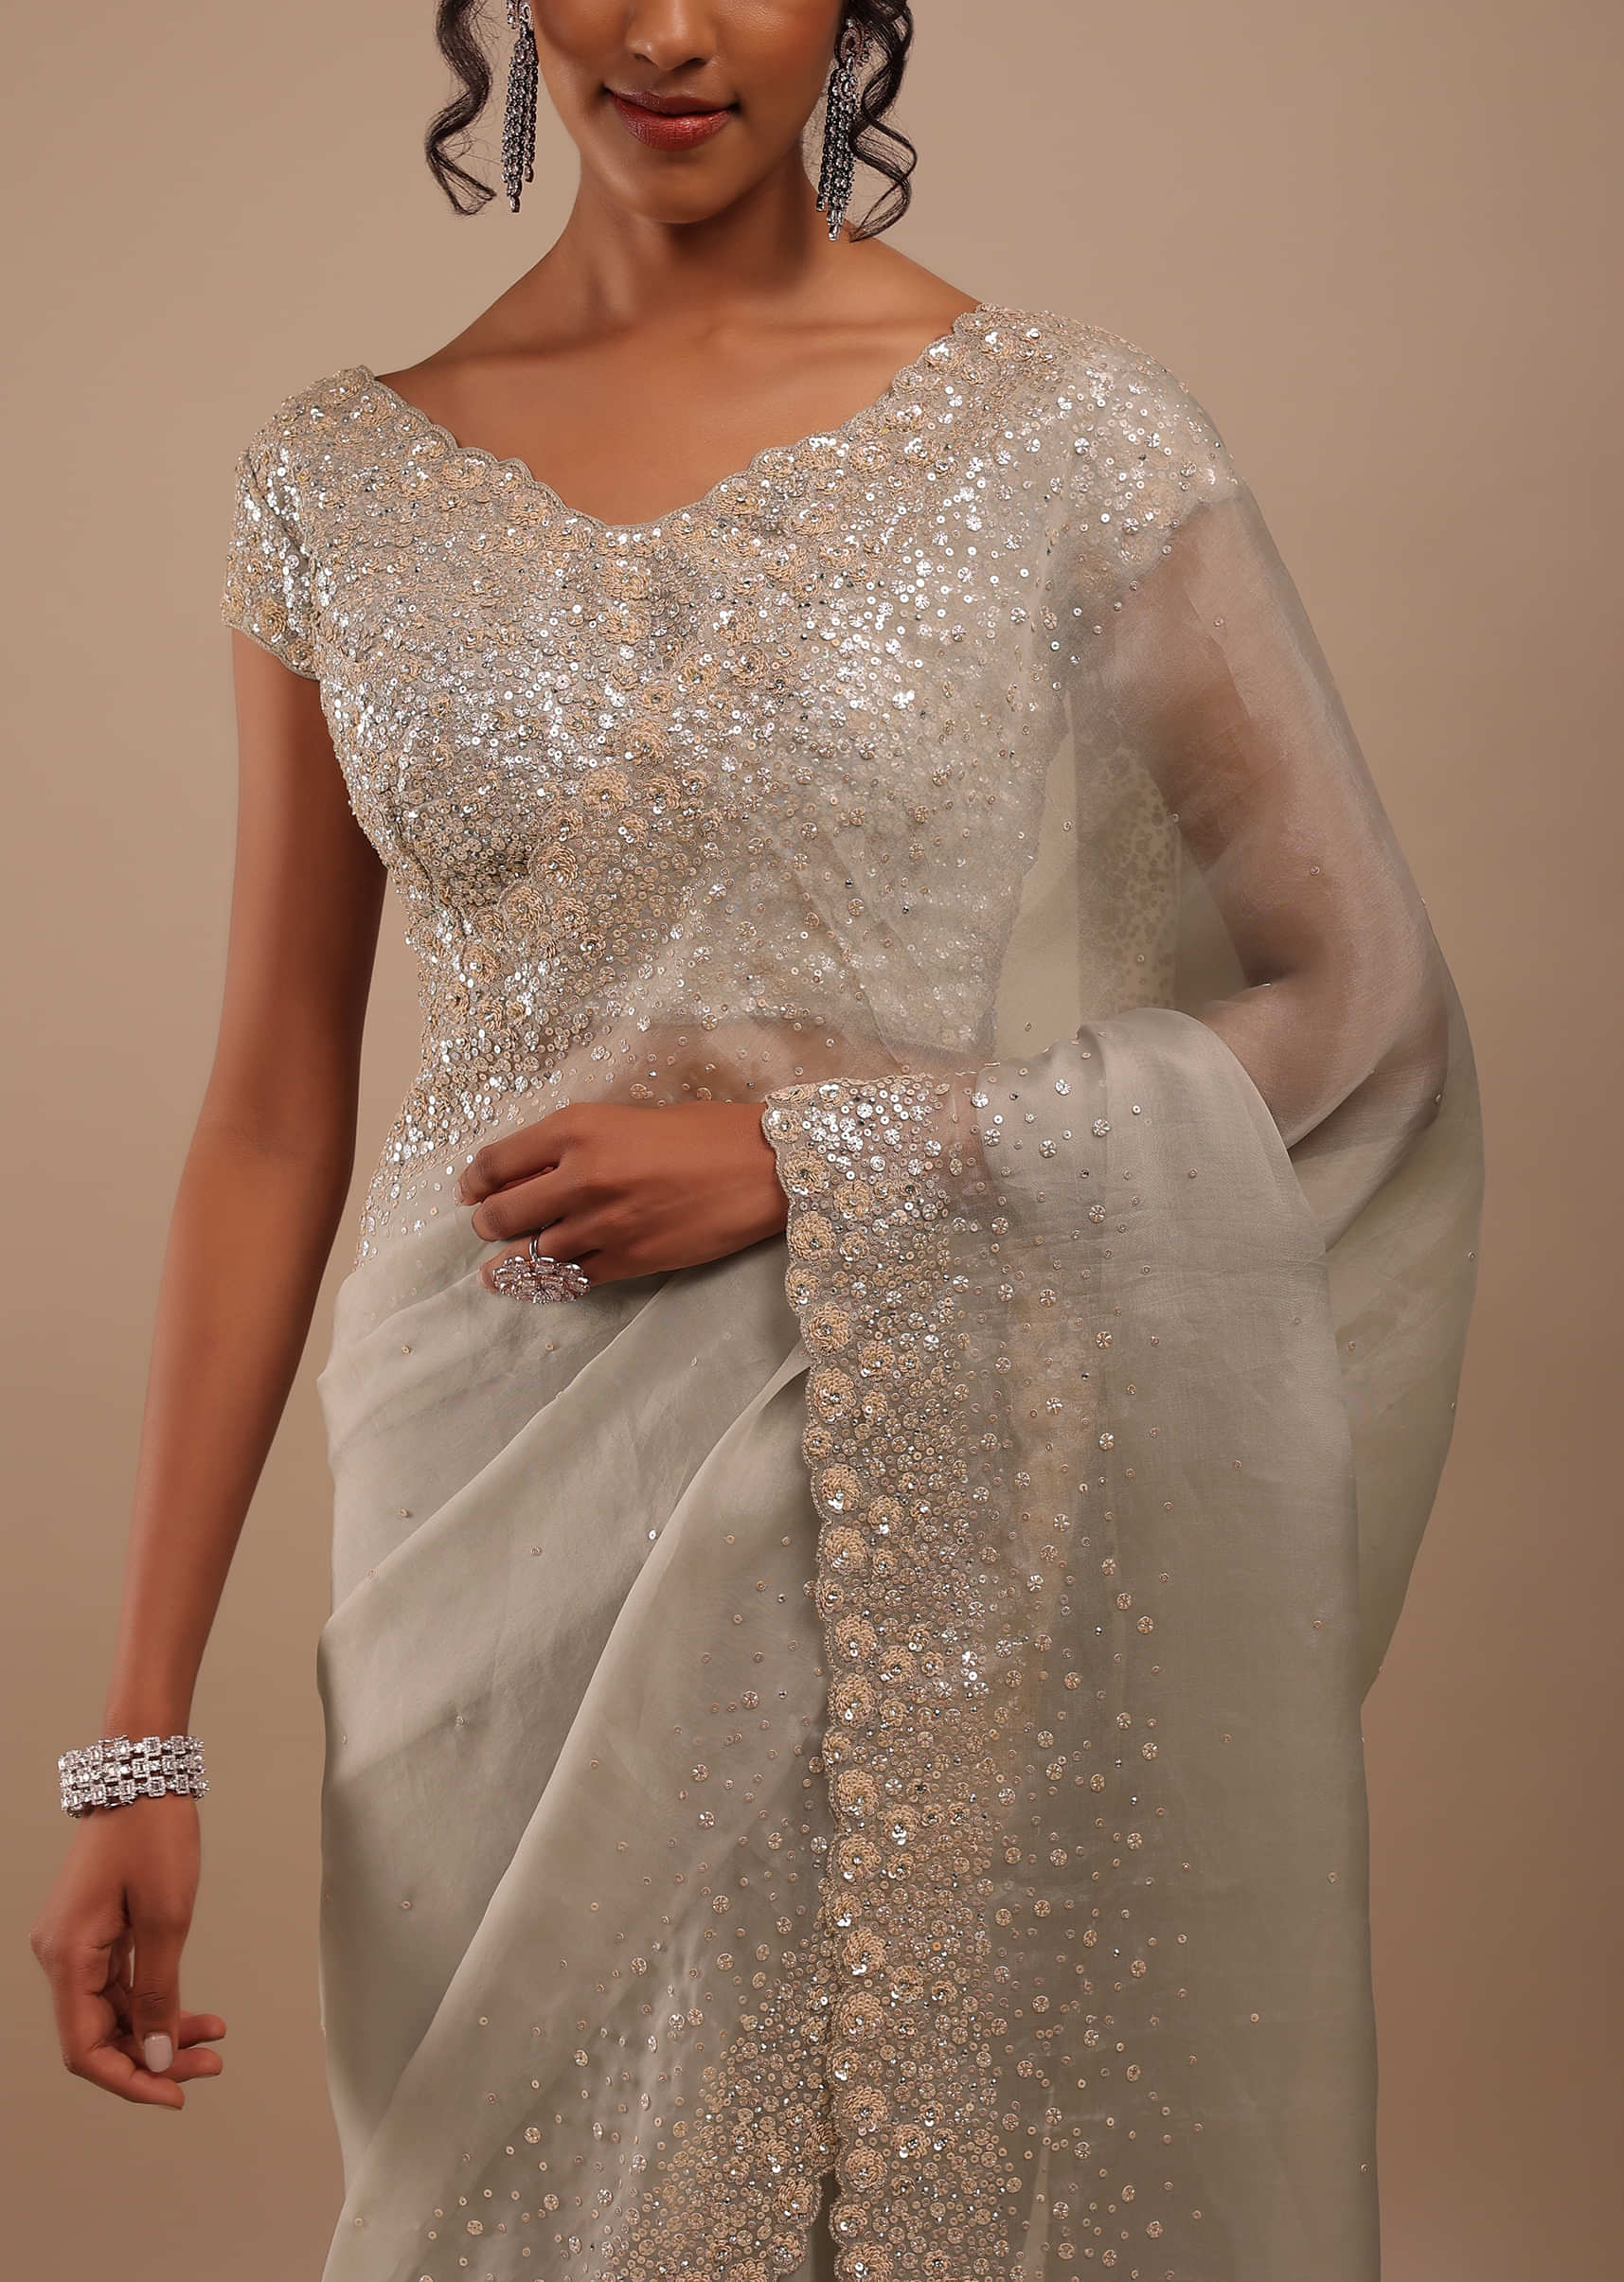 Moonstruck Grey Organza Saree In Grey And Cream Sequins 3D Floral Motifs Embroidery With The Cutwork Detailing On Border